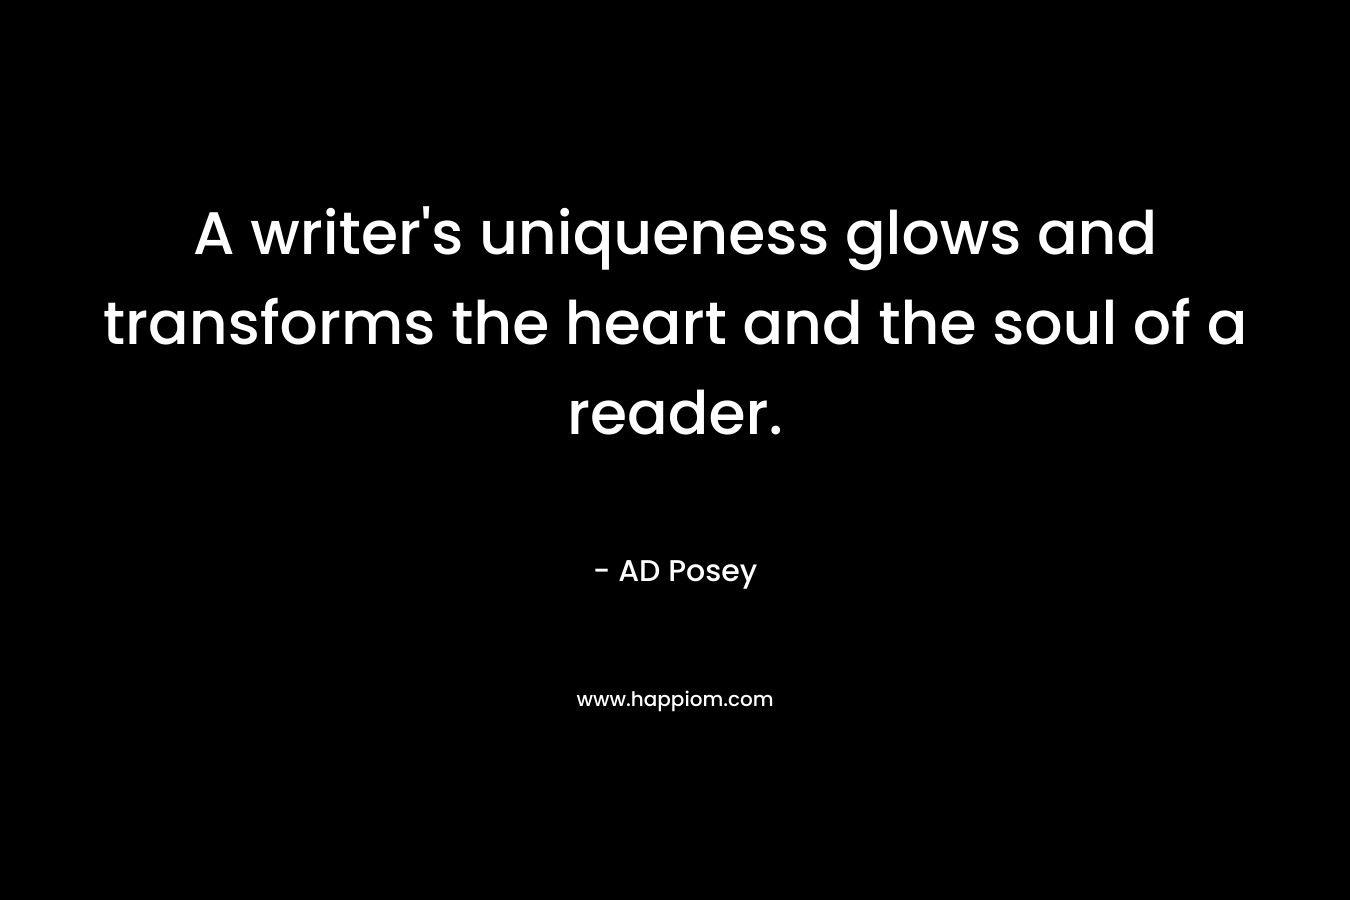 A writer's uniqueness glows and transforms the heart and the soul of a reader.